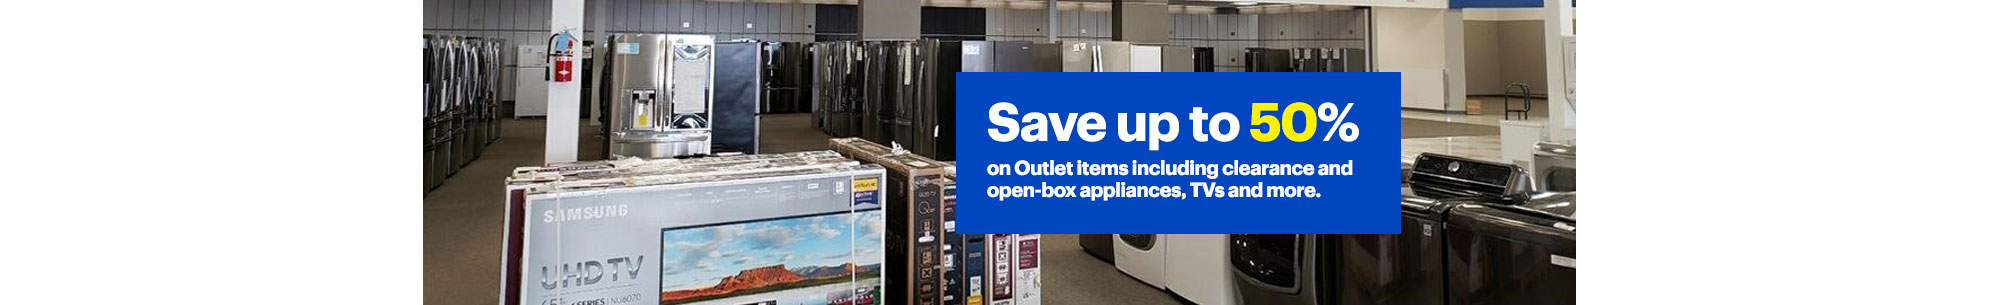 Save up to 50% on Outlet items including Clarance and open-box applications, TVs and more.